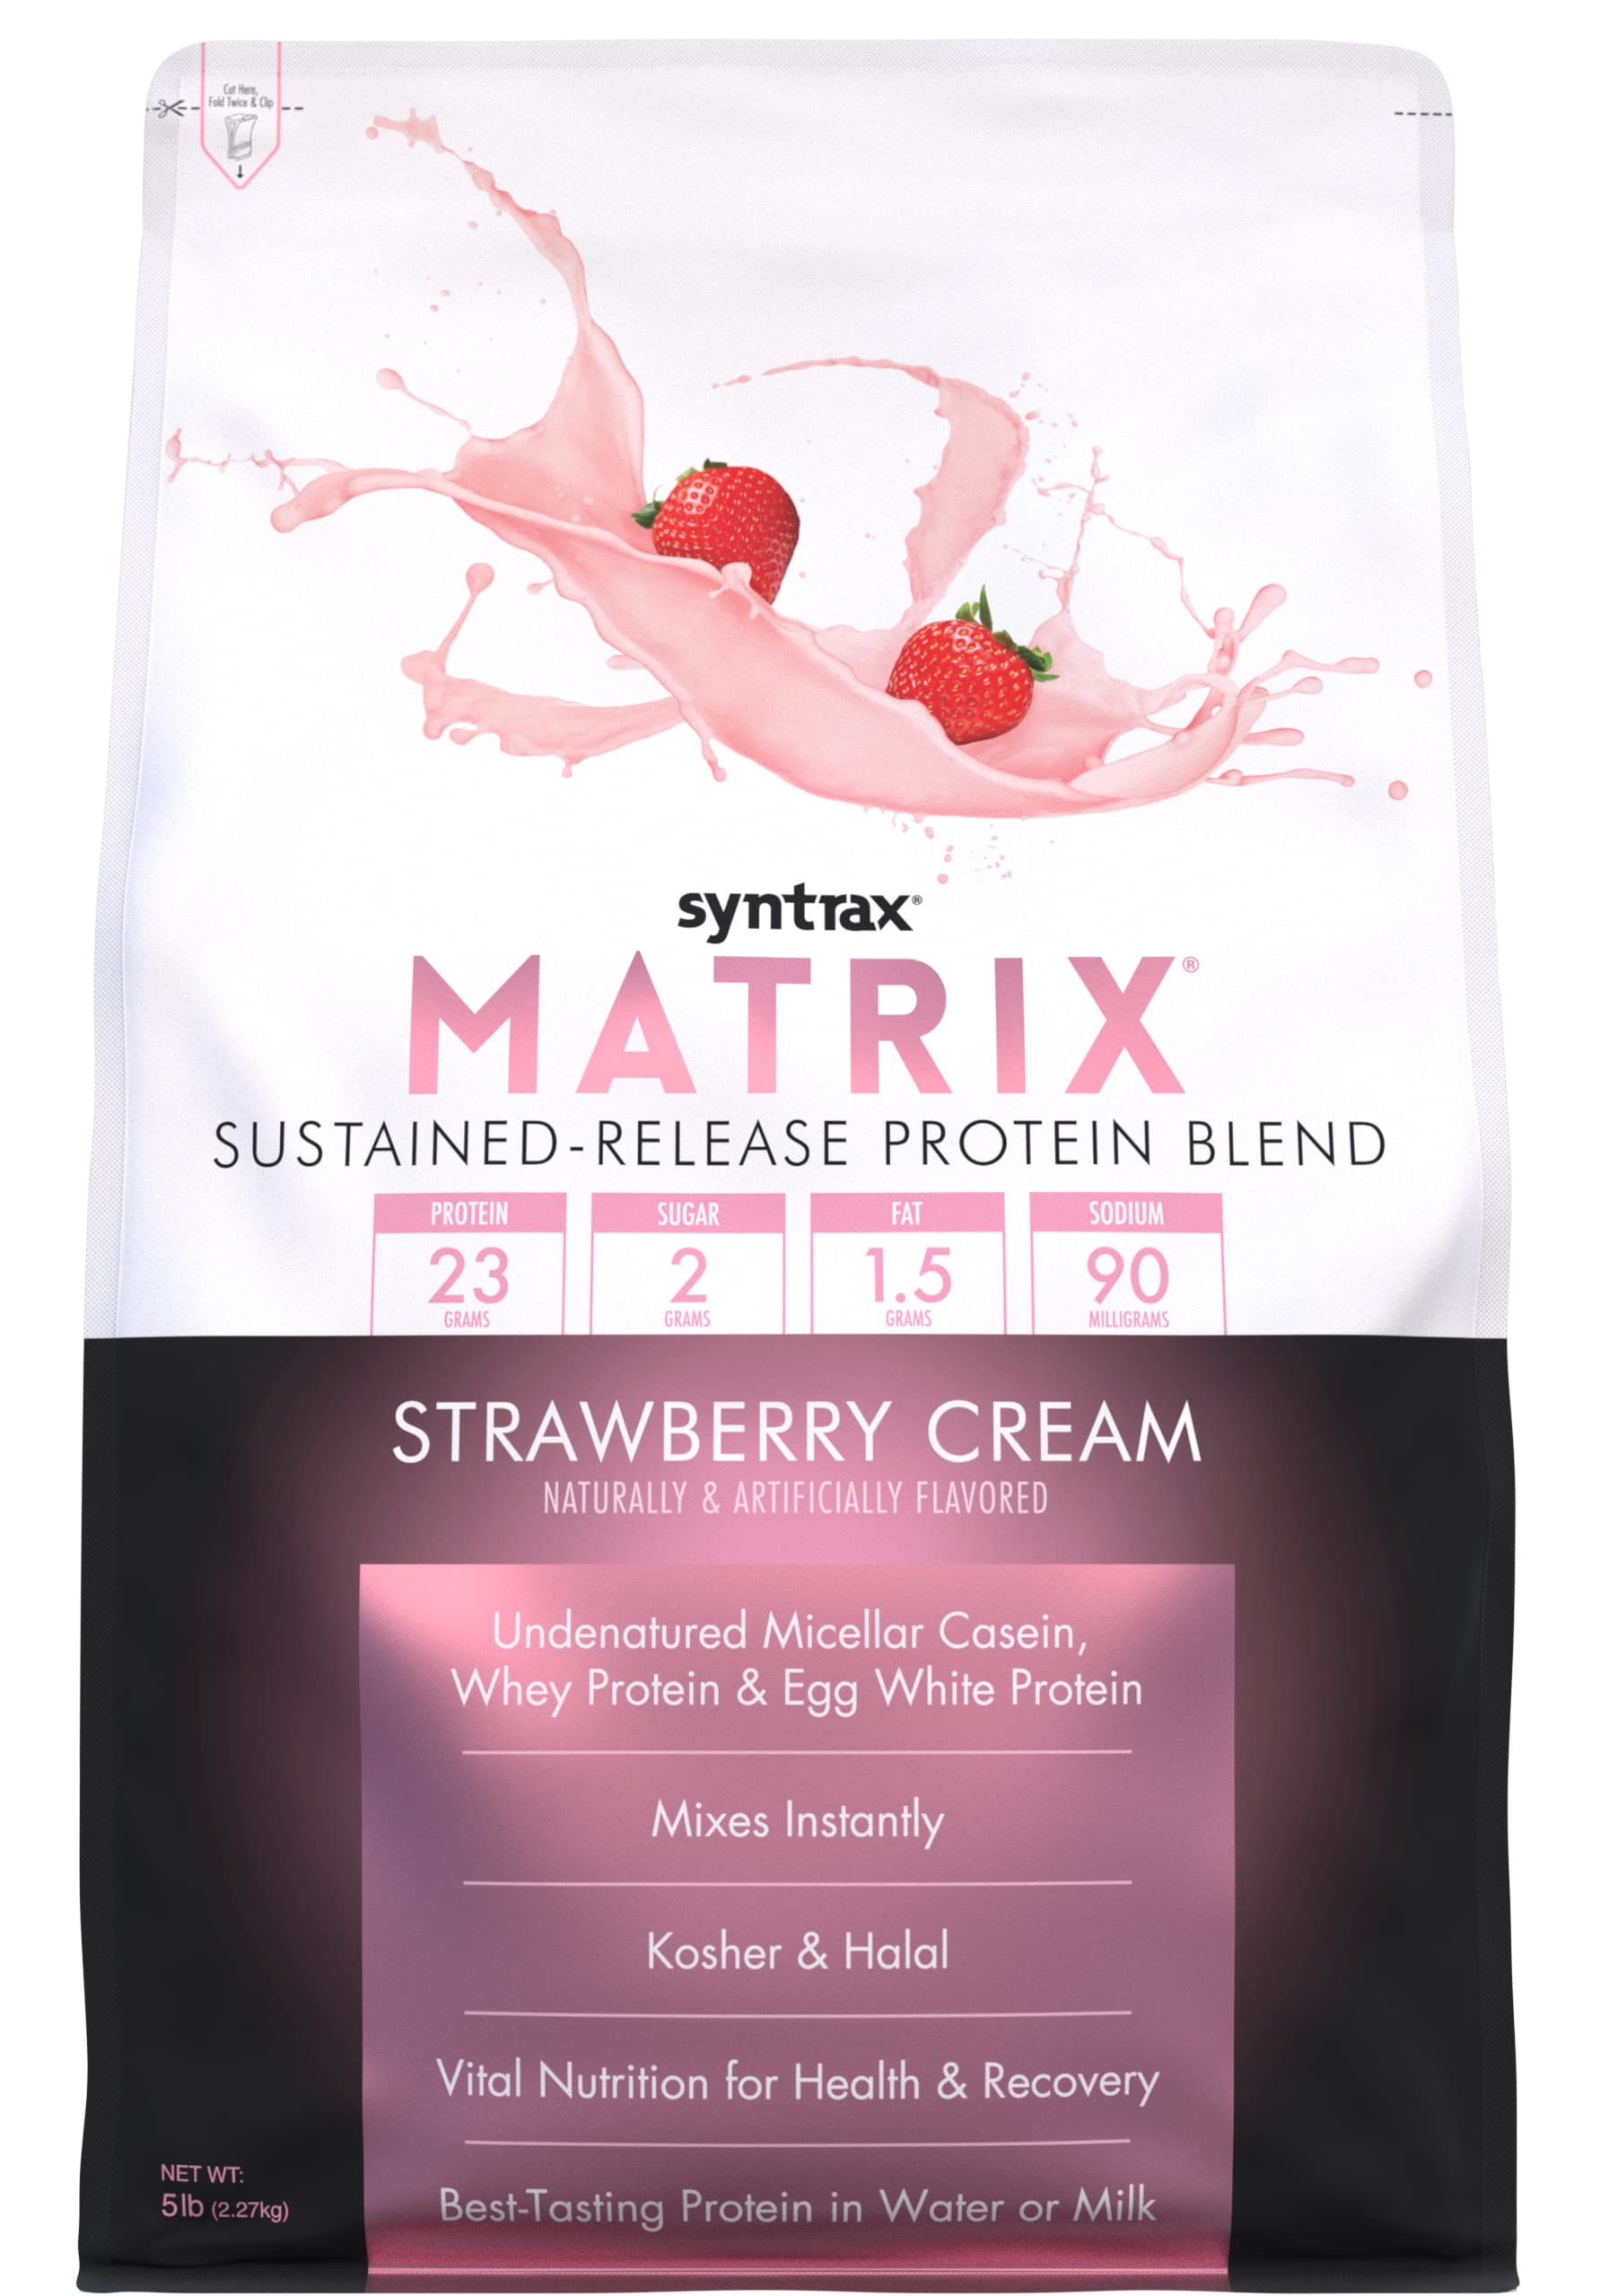 Syntrax Matrix, Native Grass-Fed, Undenatured Whey Protein, Micellar Casein and Egg Albumin with Glutamine Peptides, RBST-Free, Smooth Creamy Flavor, Strawberry Cream 5lb